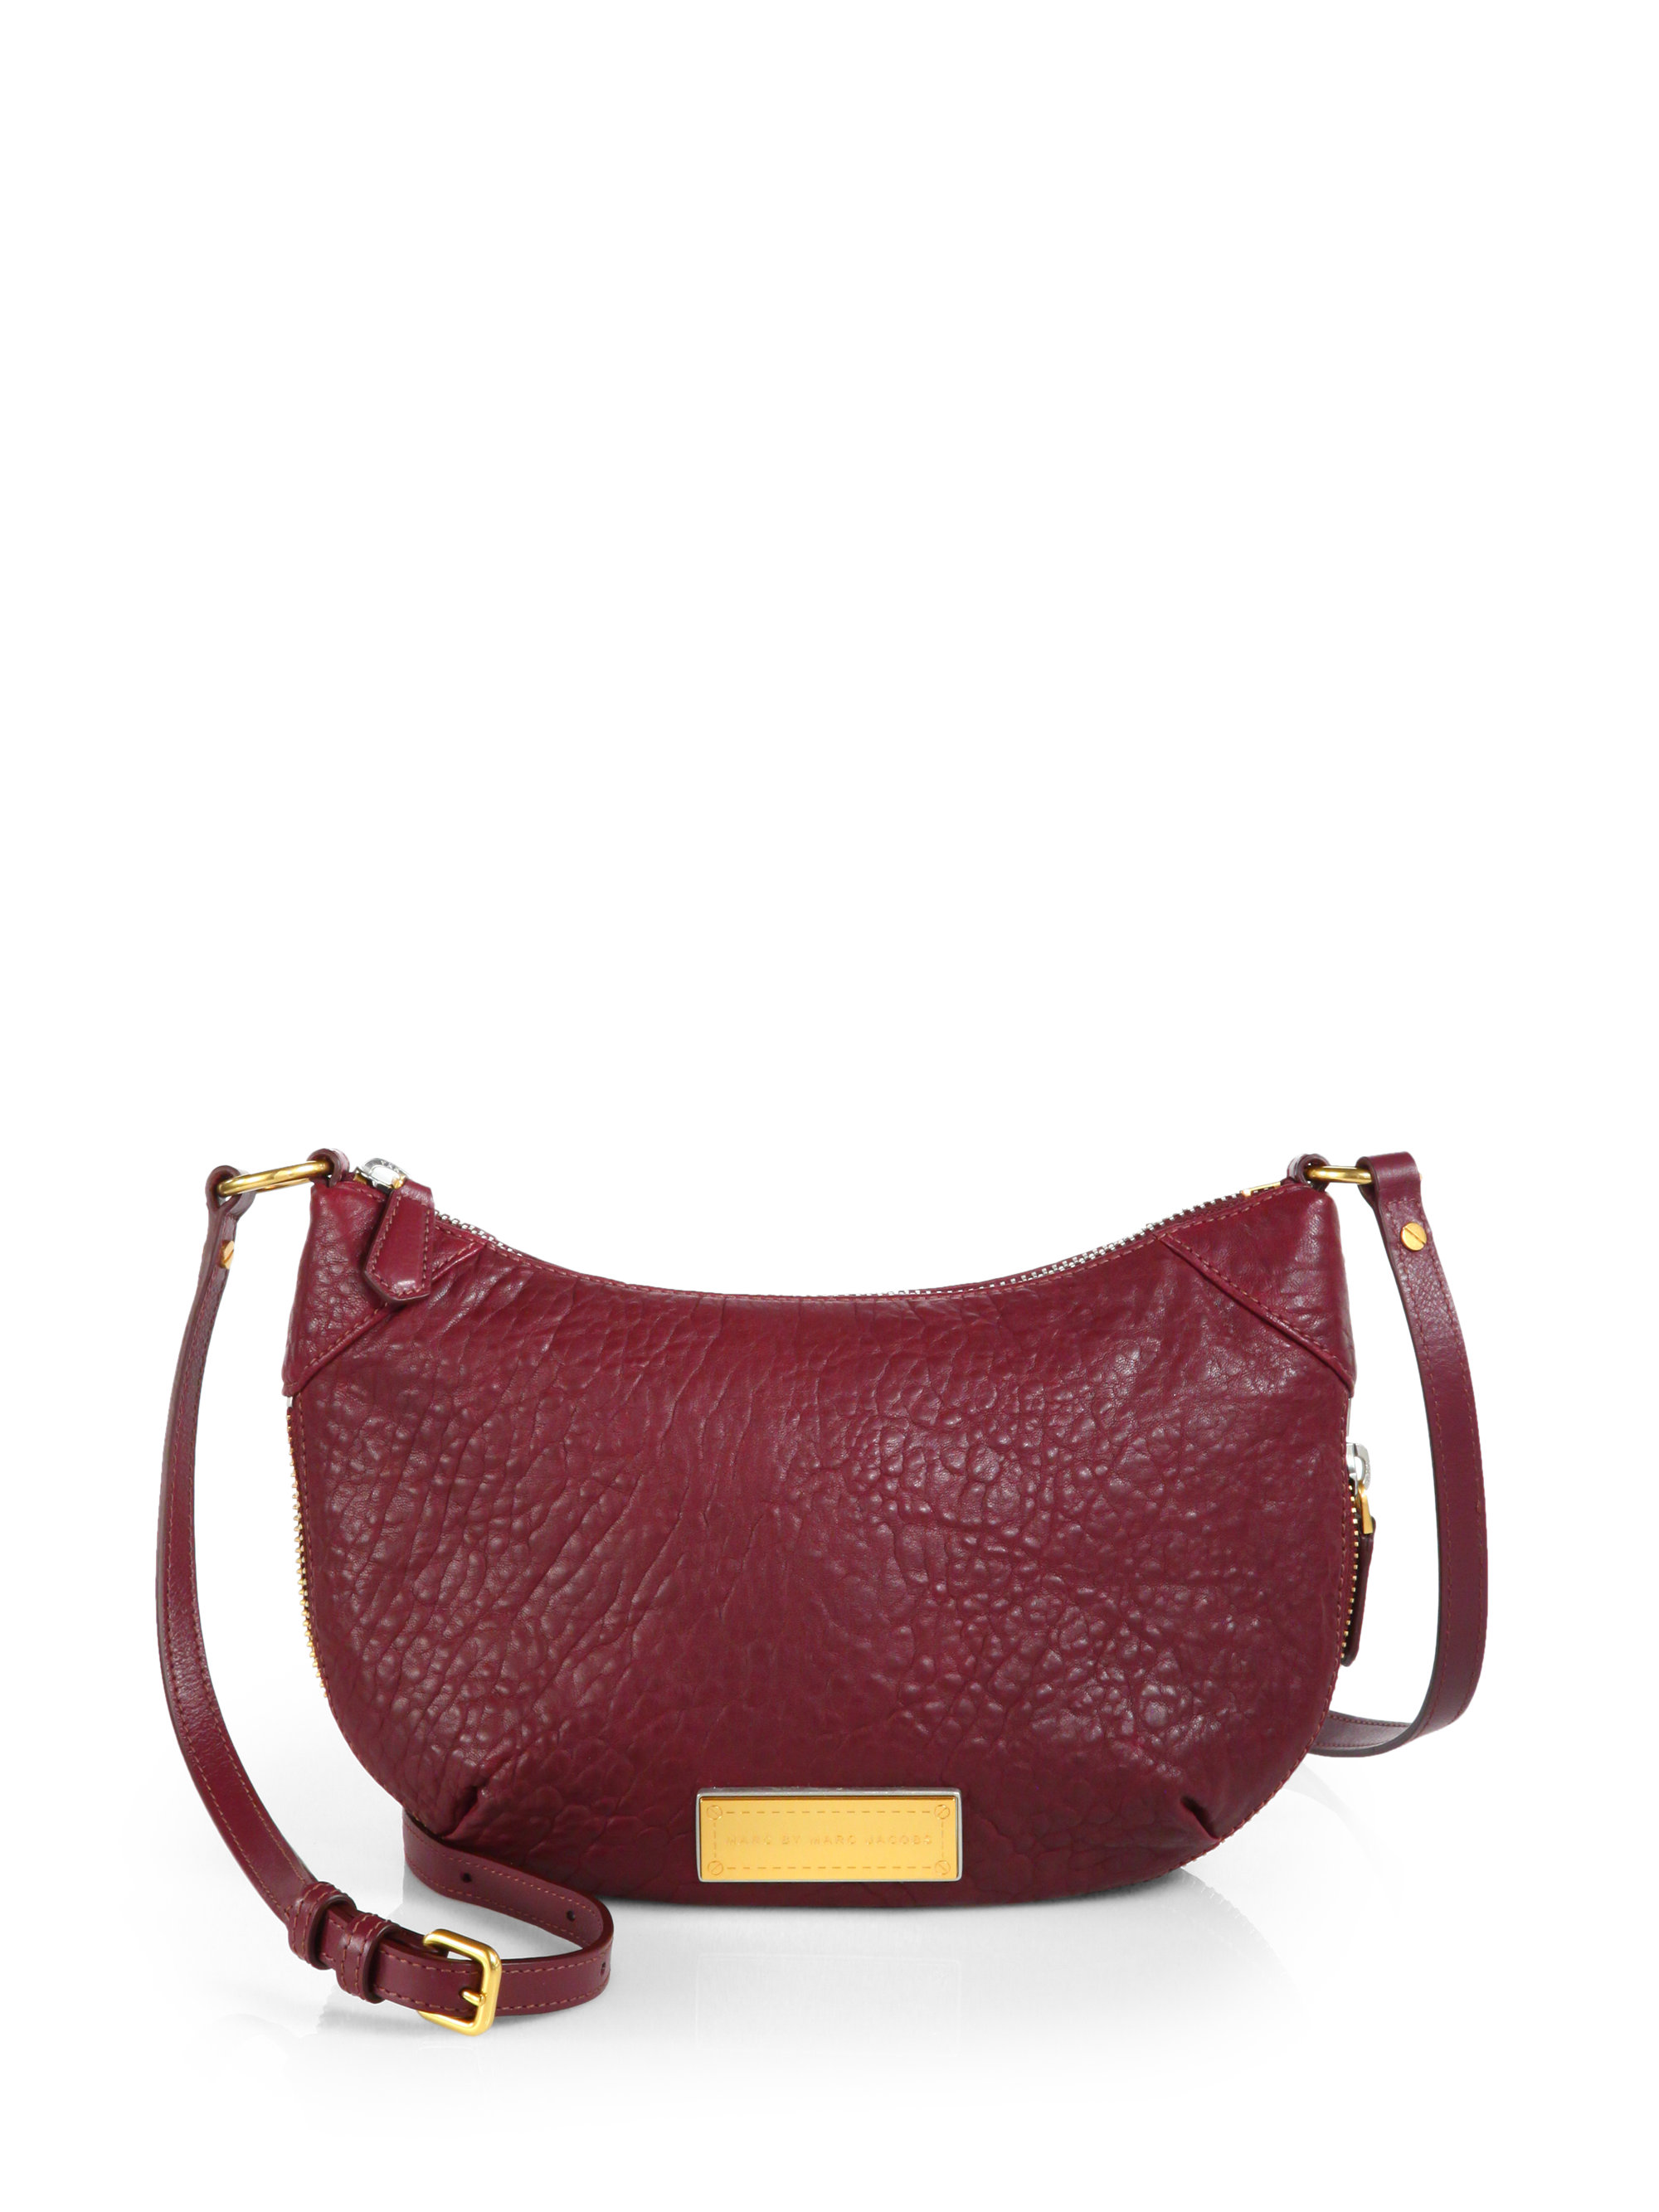 Lyst - Marc By Marc Jacobs Washed Up Crossbody Bag in Red